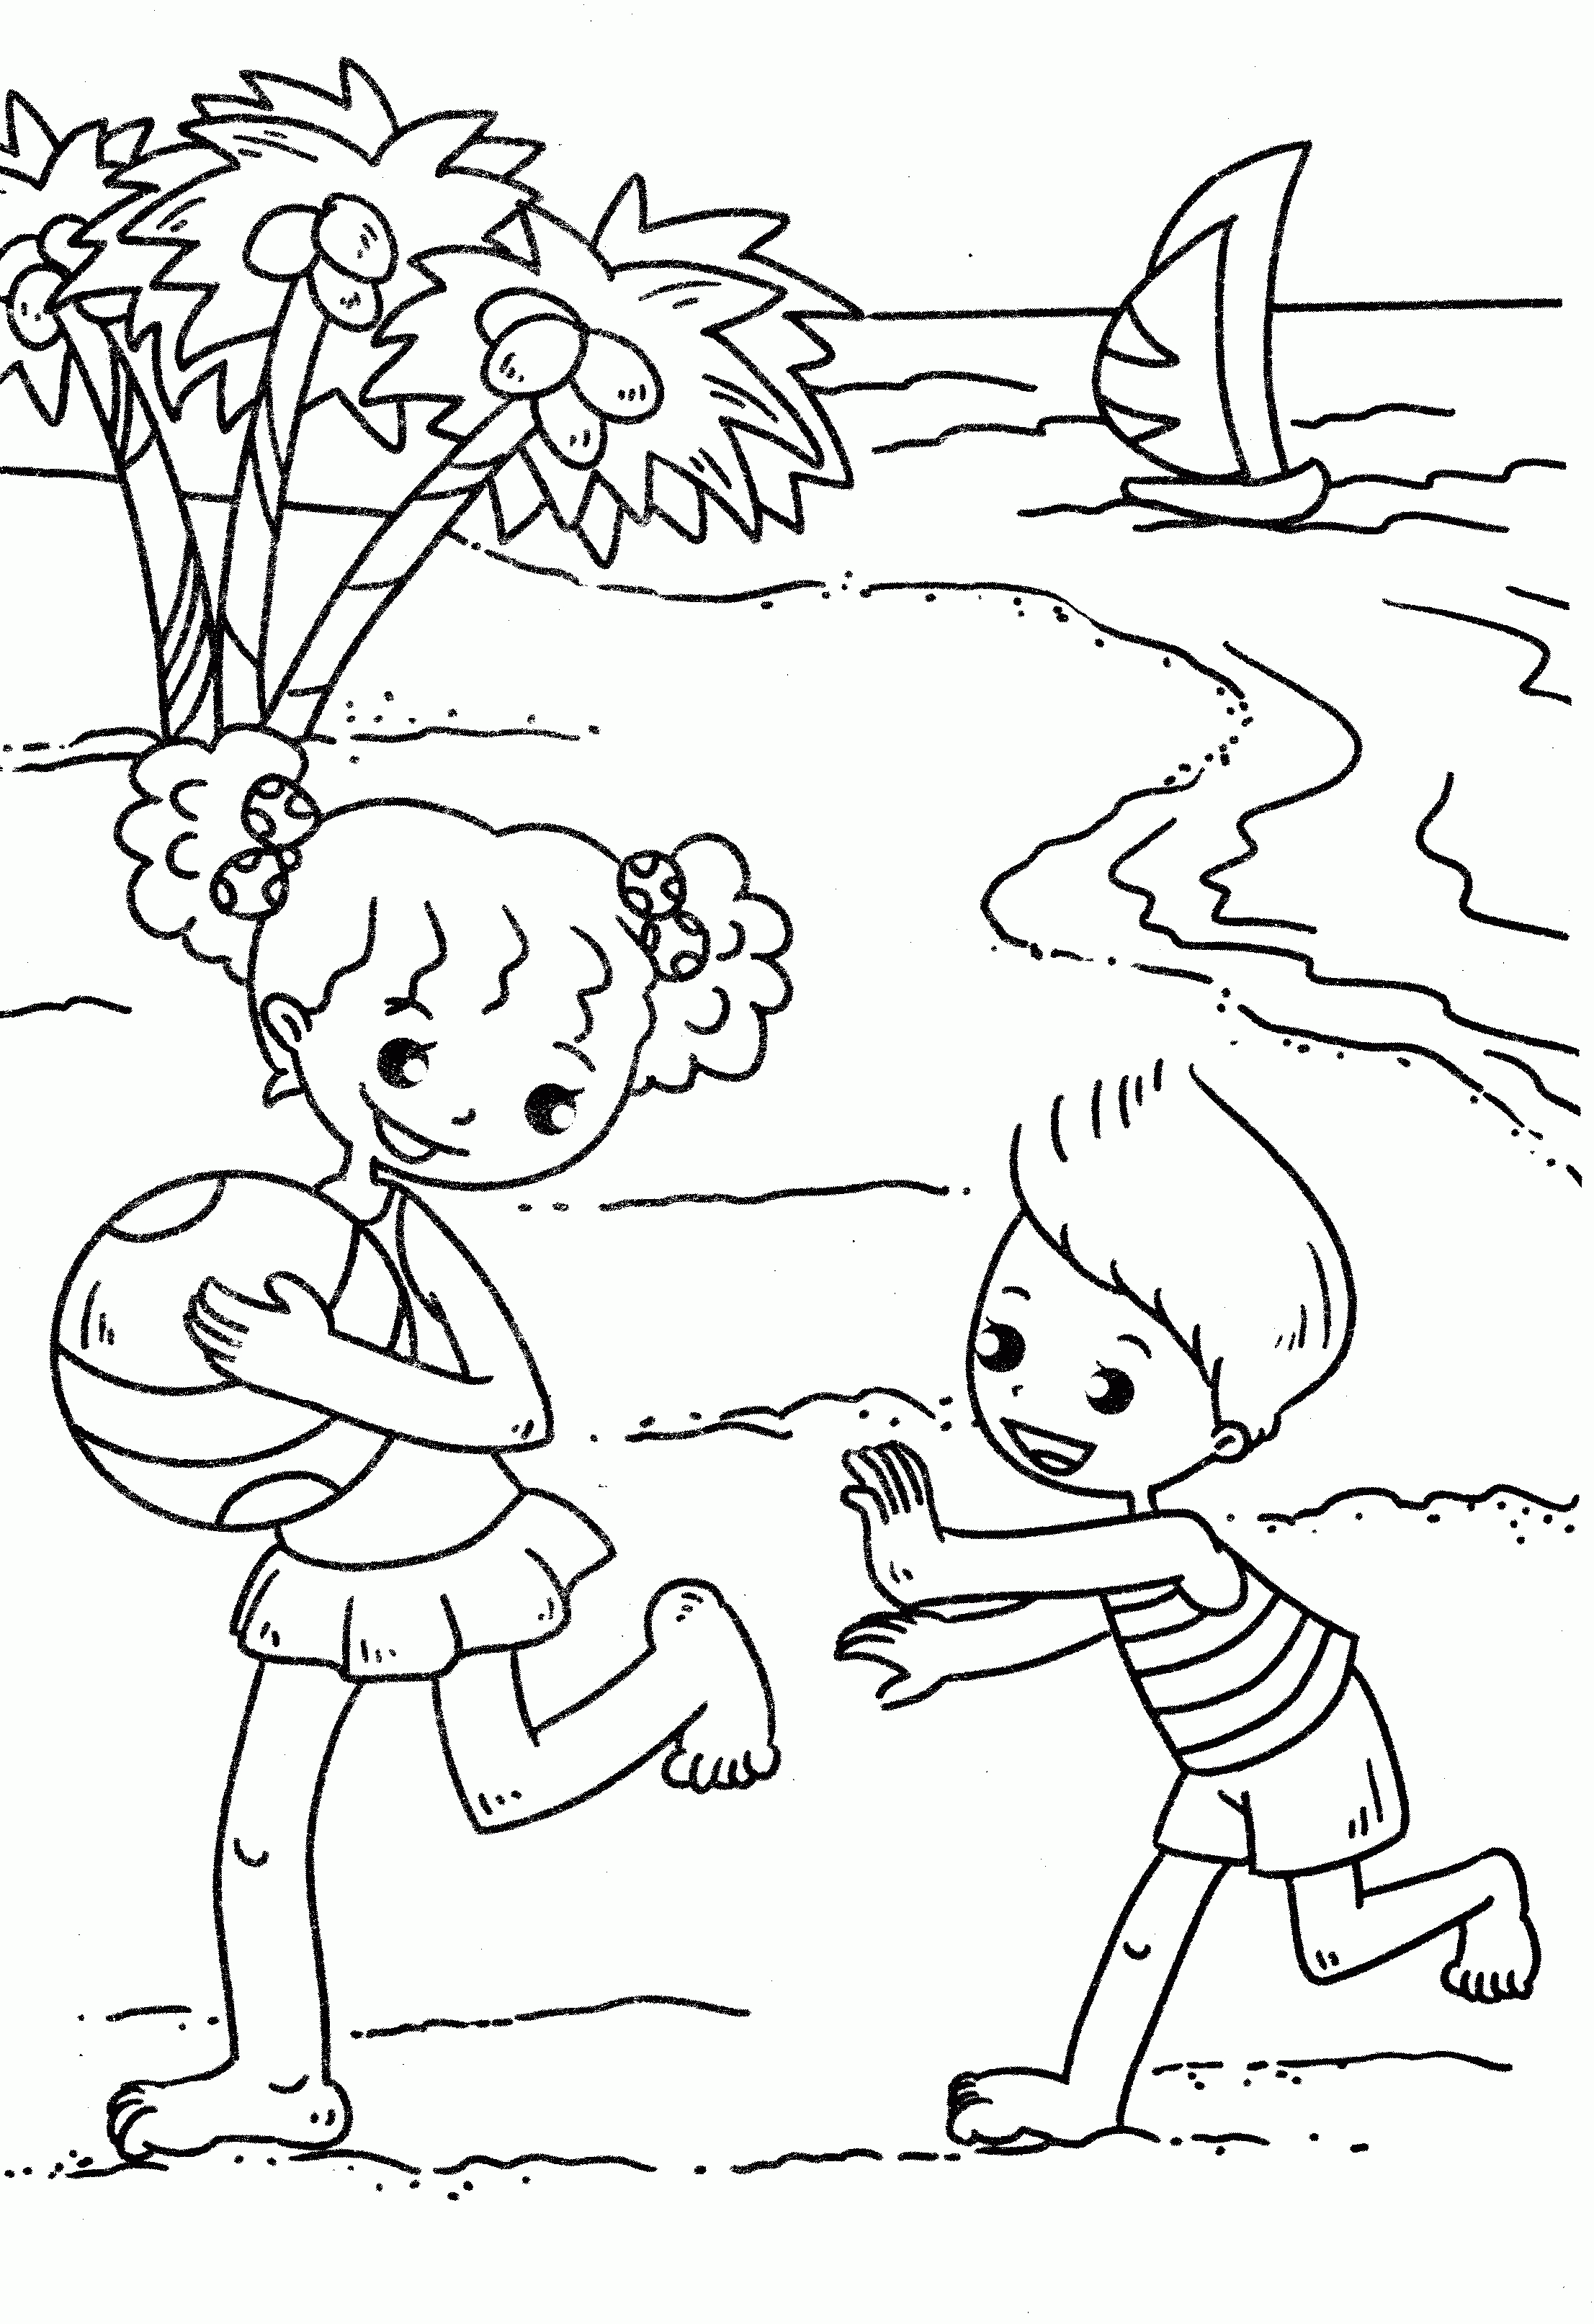 beach-coloring-page-0123-q1